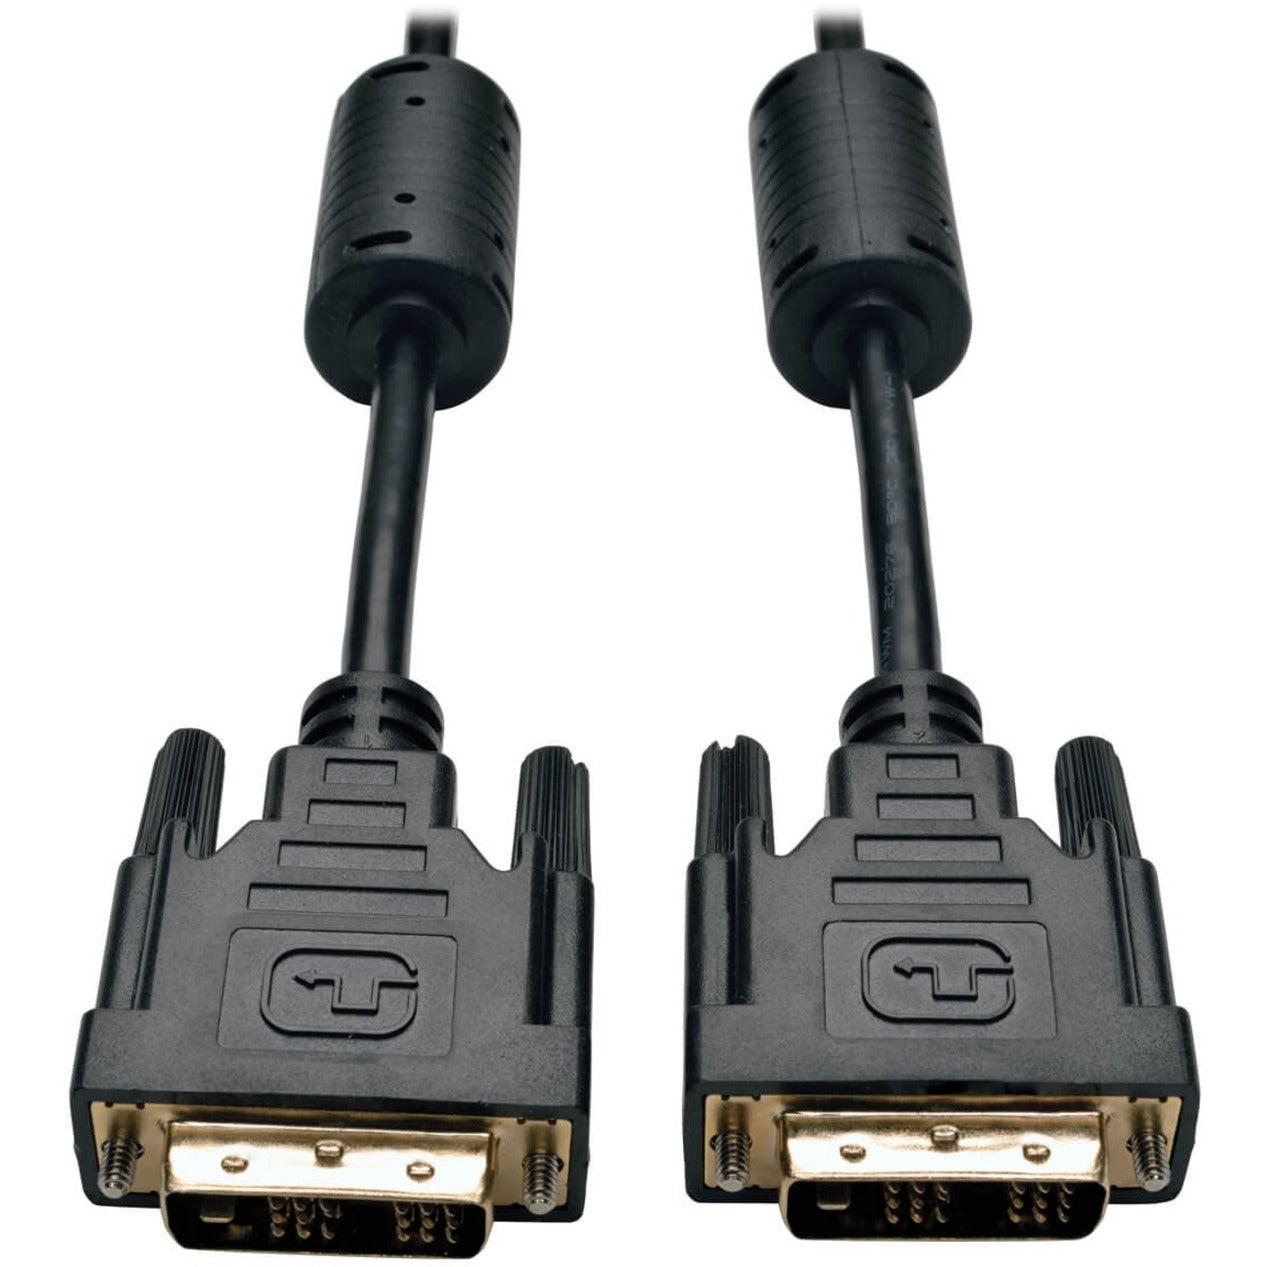 Tripp Lite P561-003 3-ft. DVI Single Link TMDS Cable (DVI-D M/M), Video Cable for TV, Projector, Monitor